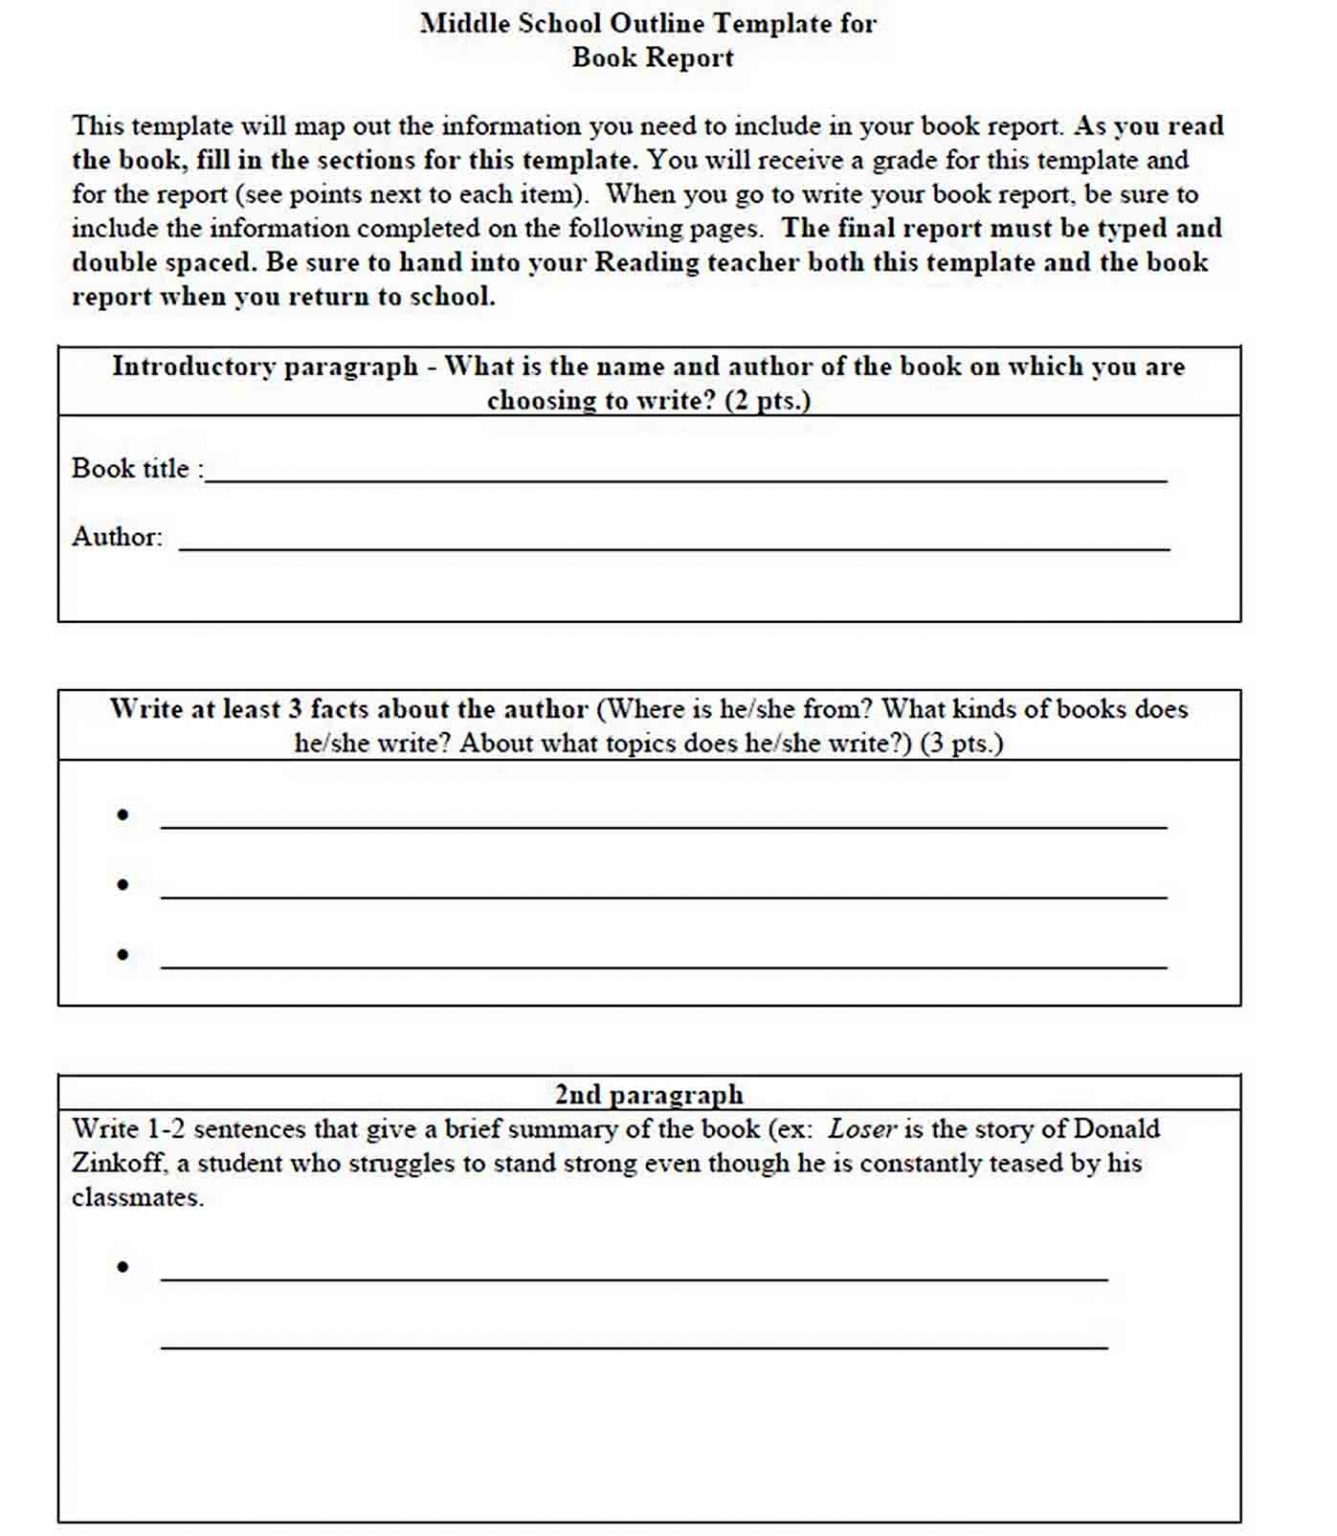 Middle School Book Report Template - Geton The Green Templates with Book Report Template Middle School